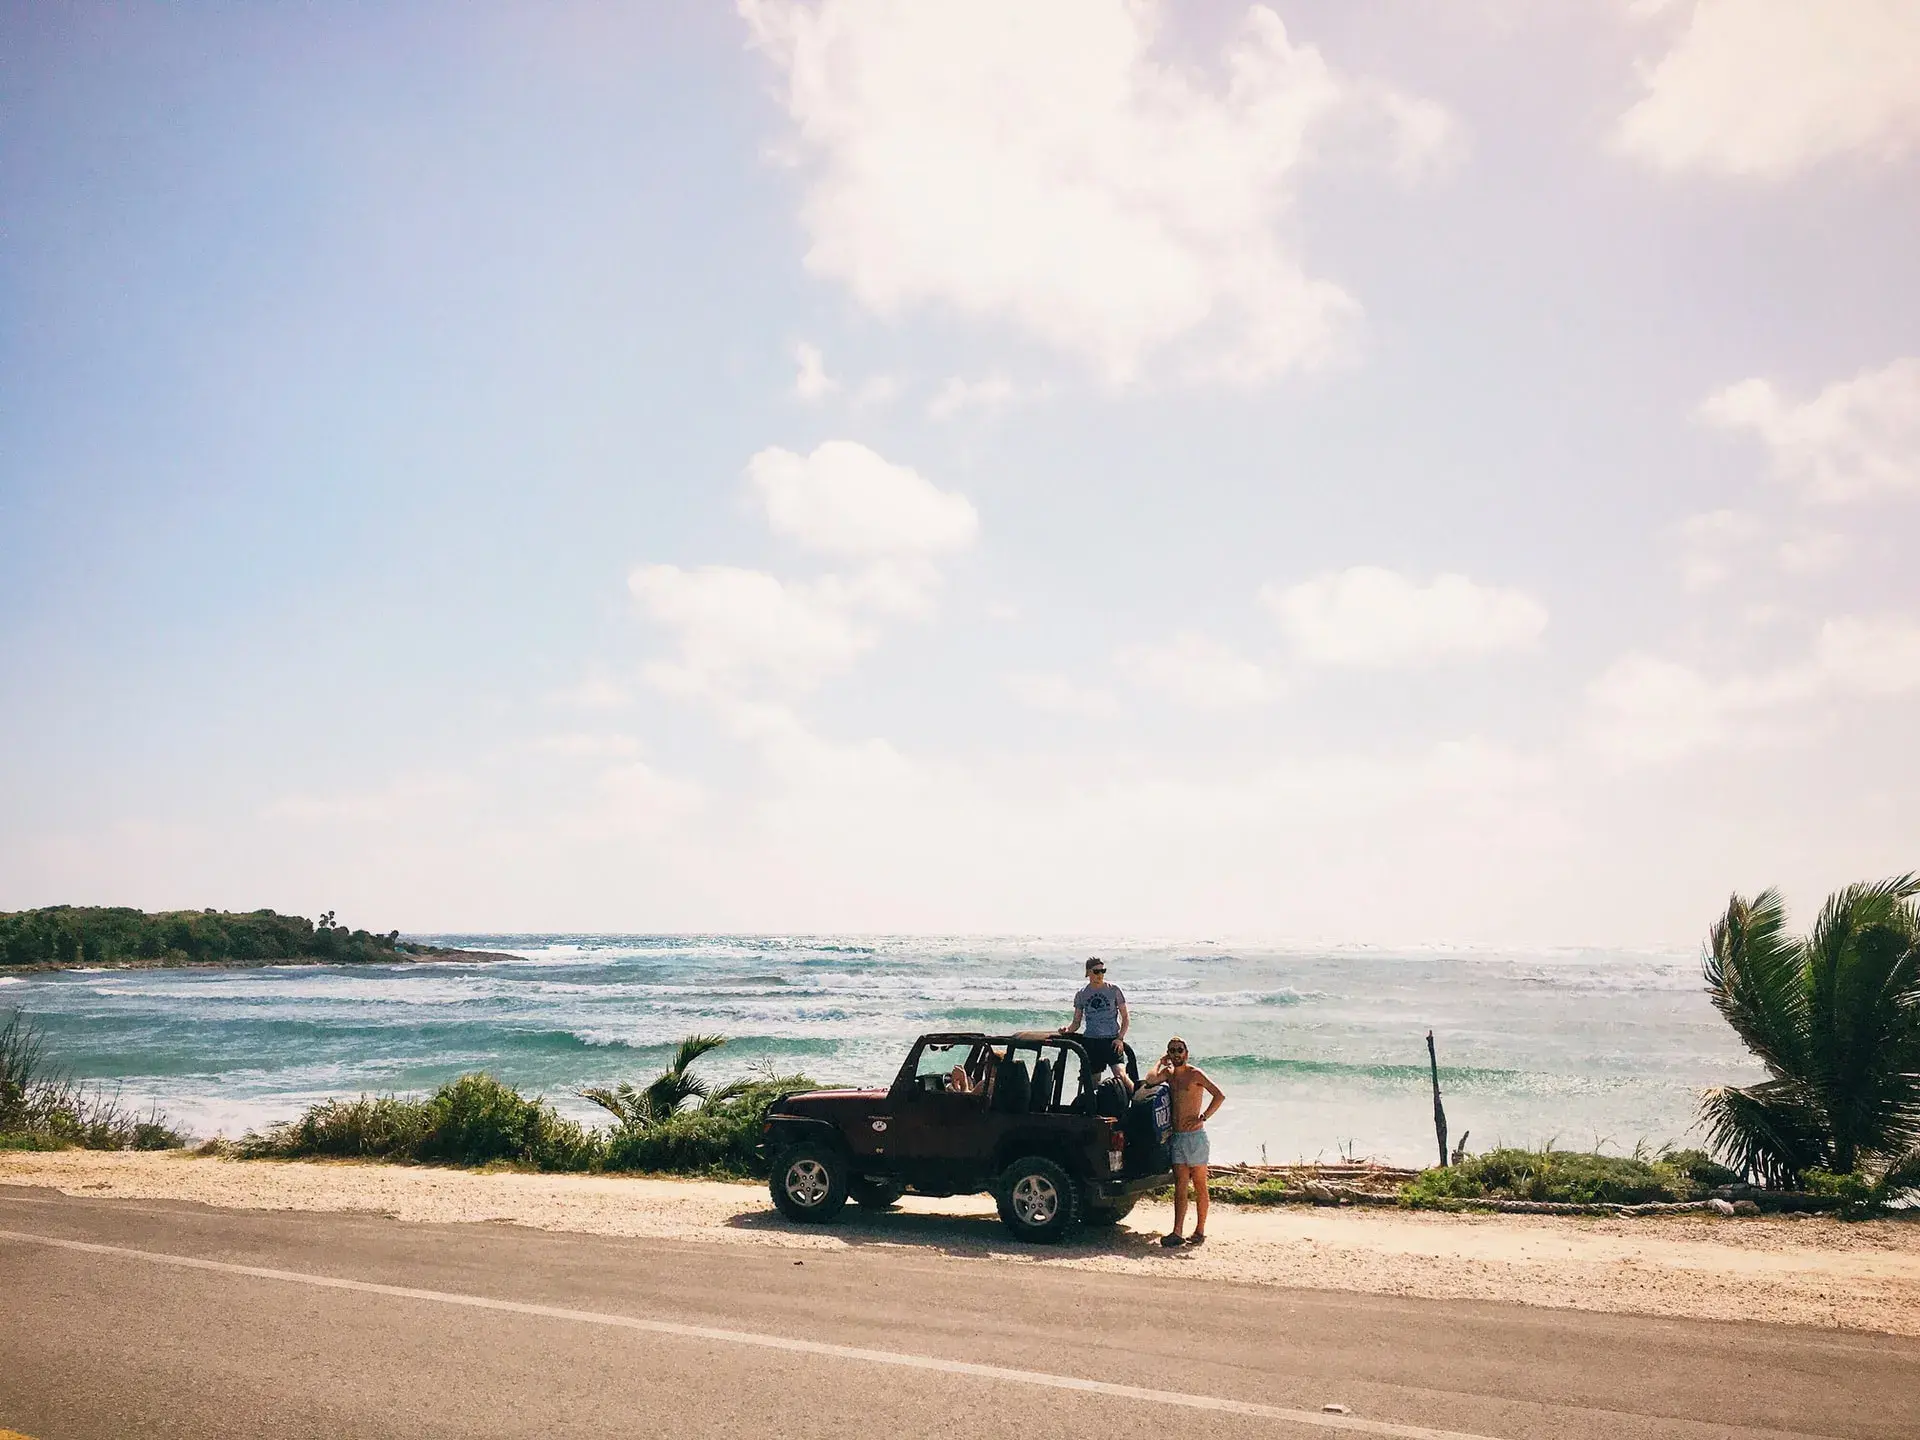 People in a car by the ocean in Hawaii